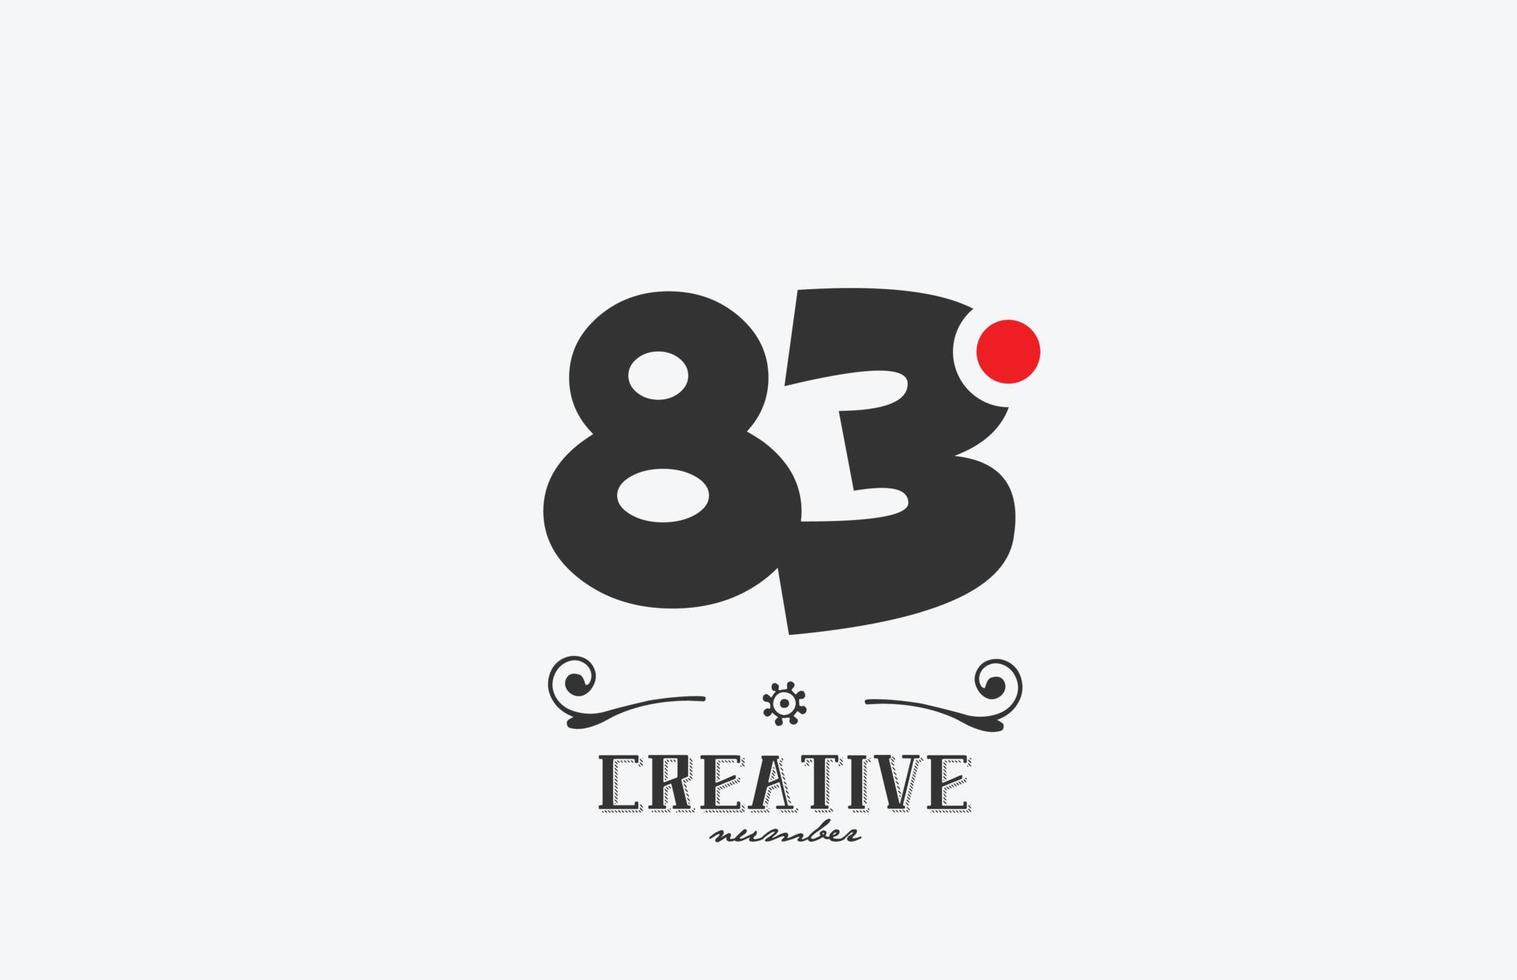 grey 83 number logo icon design with red dot. Creative template for company and business vector